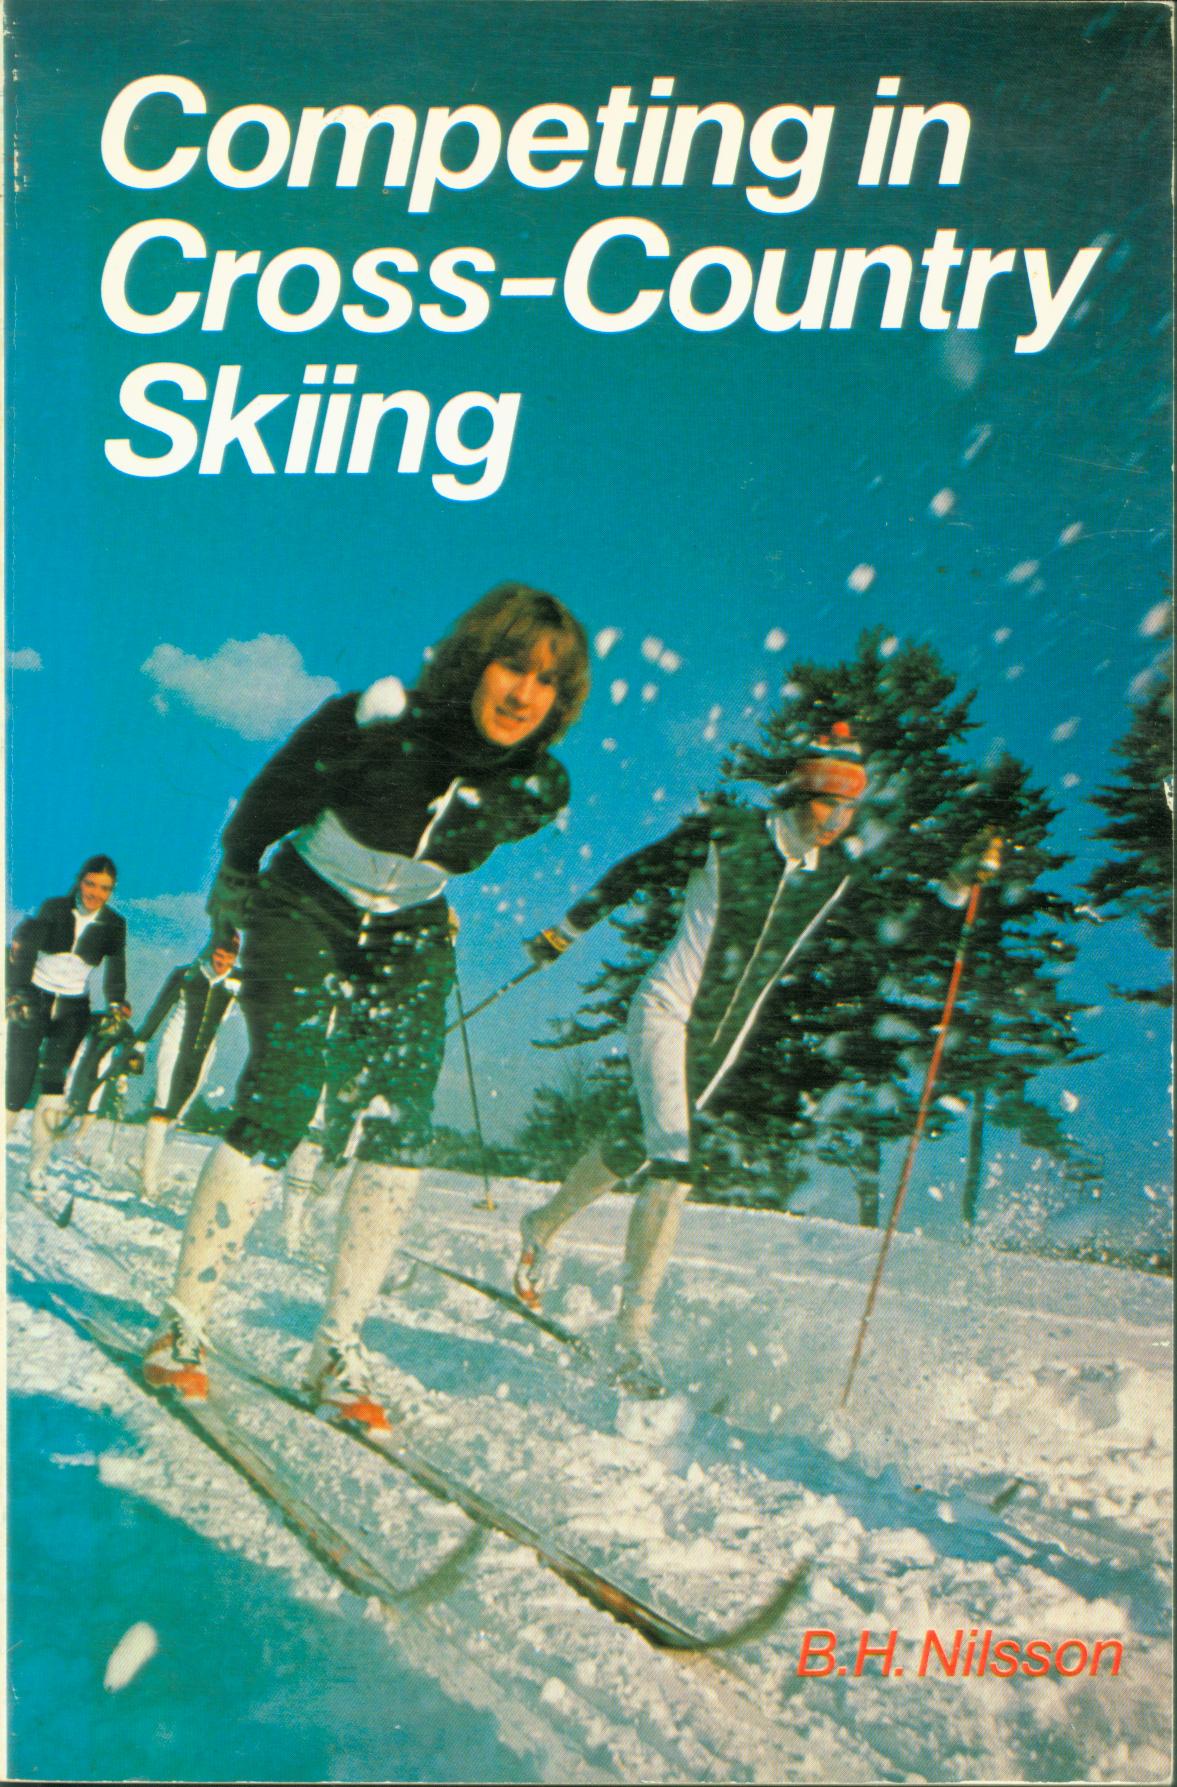 COMPETING IN CROSS-COUNTRY SKIING.